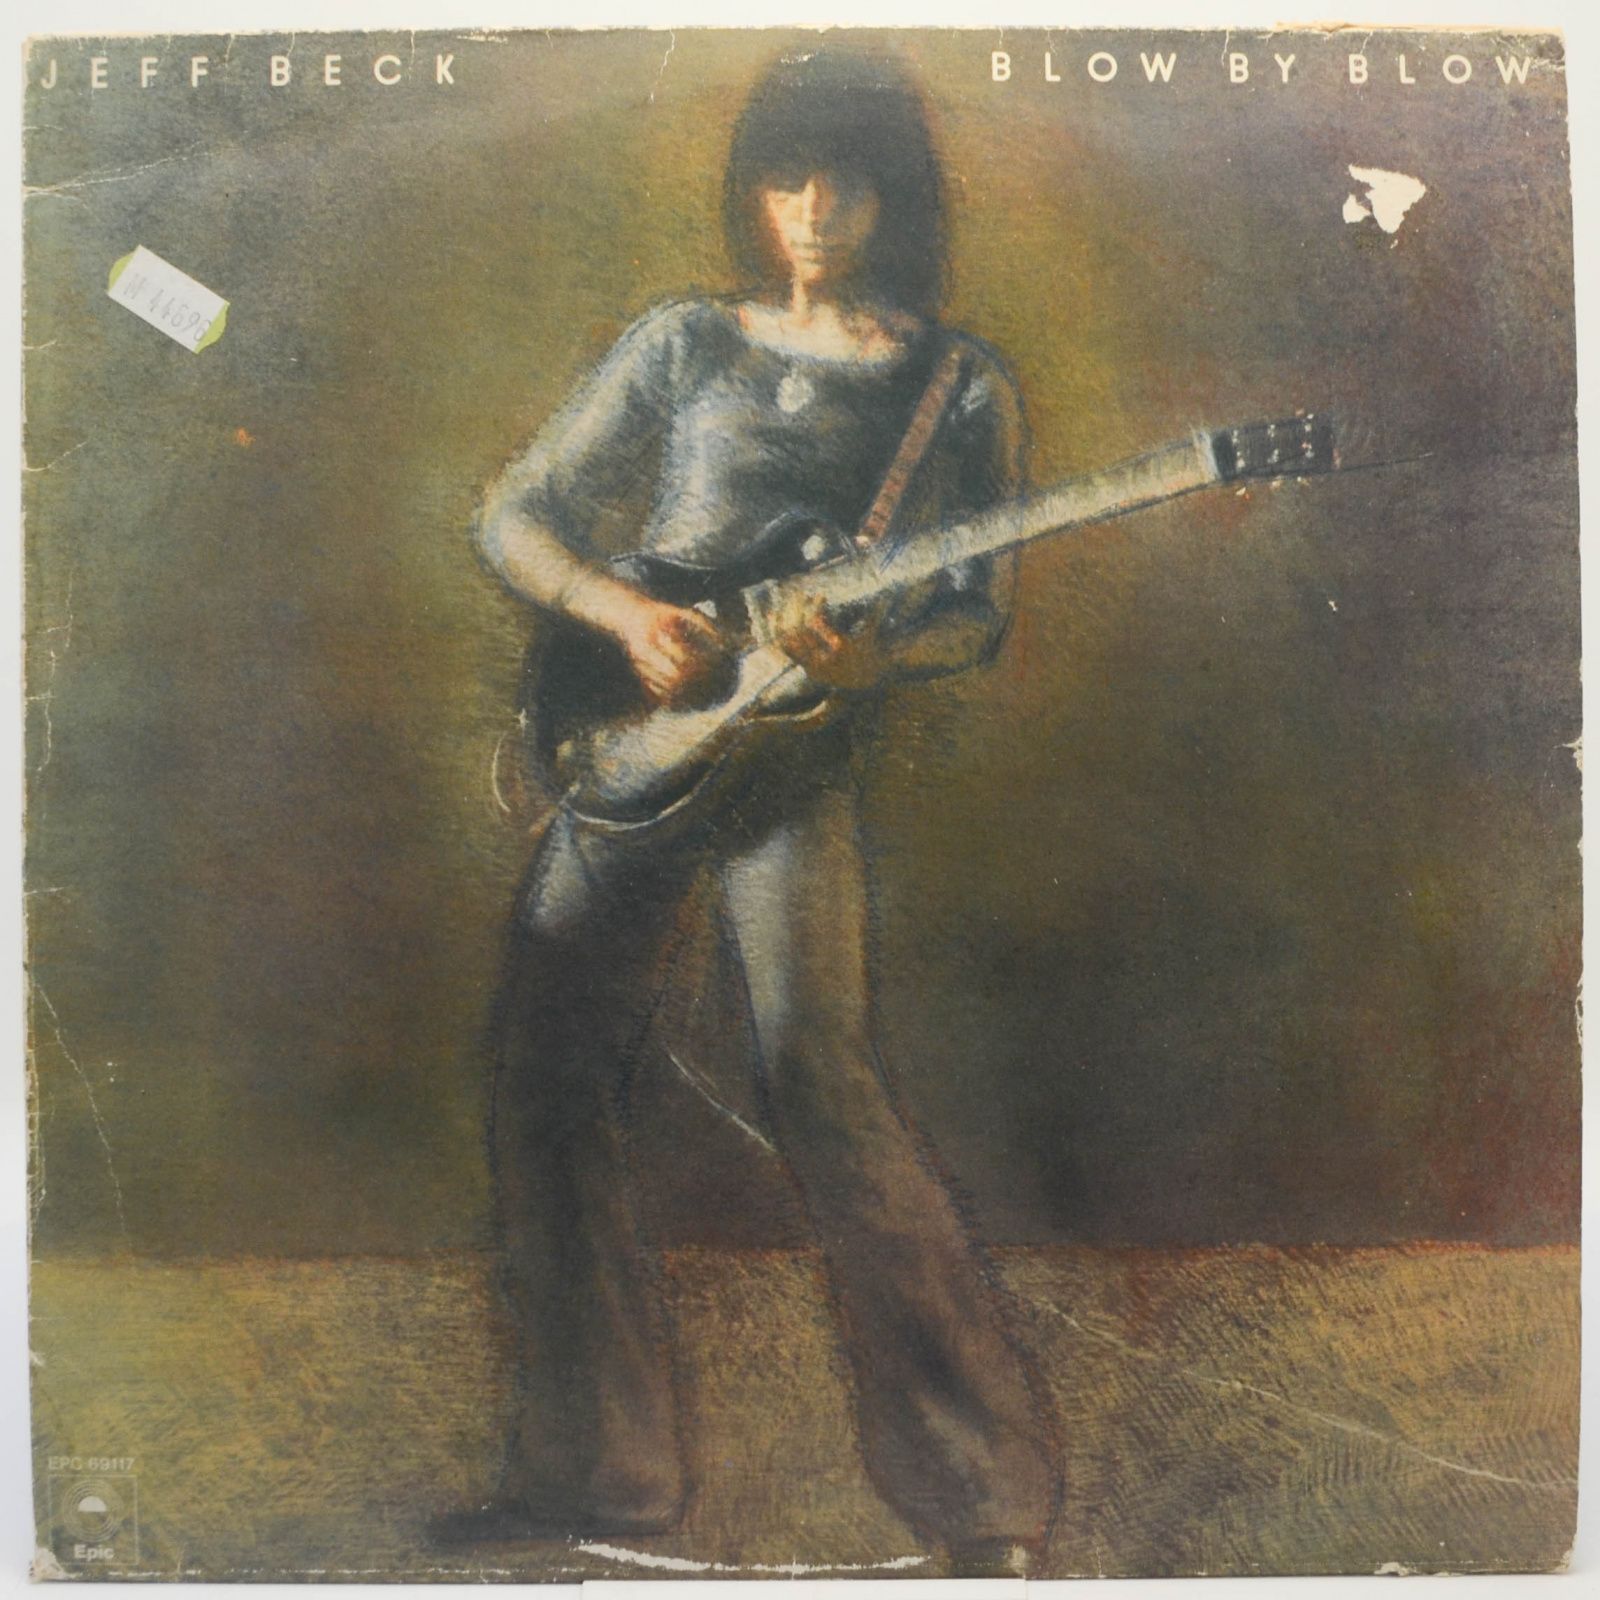 Jeff Beck — Blow By Blow, 1975